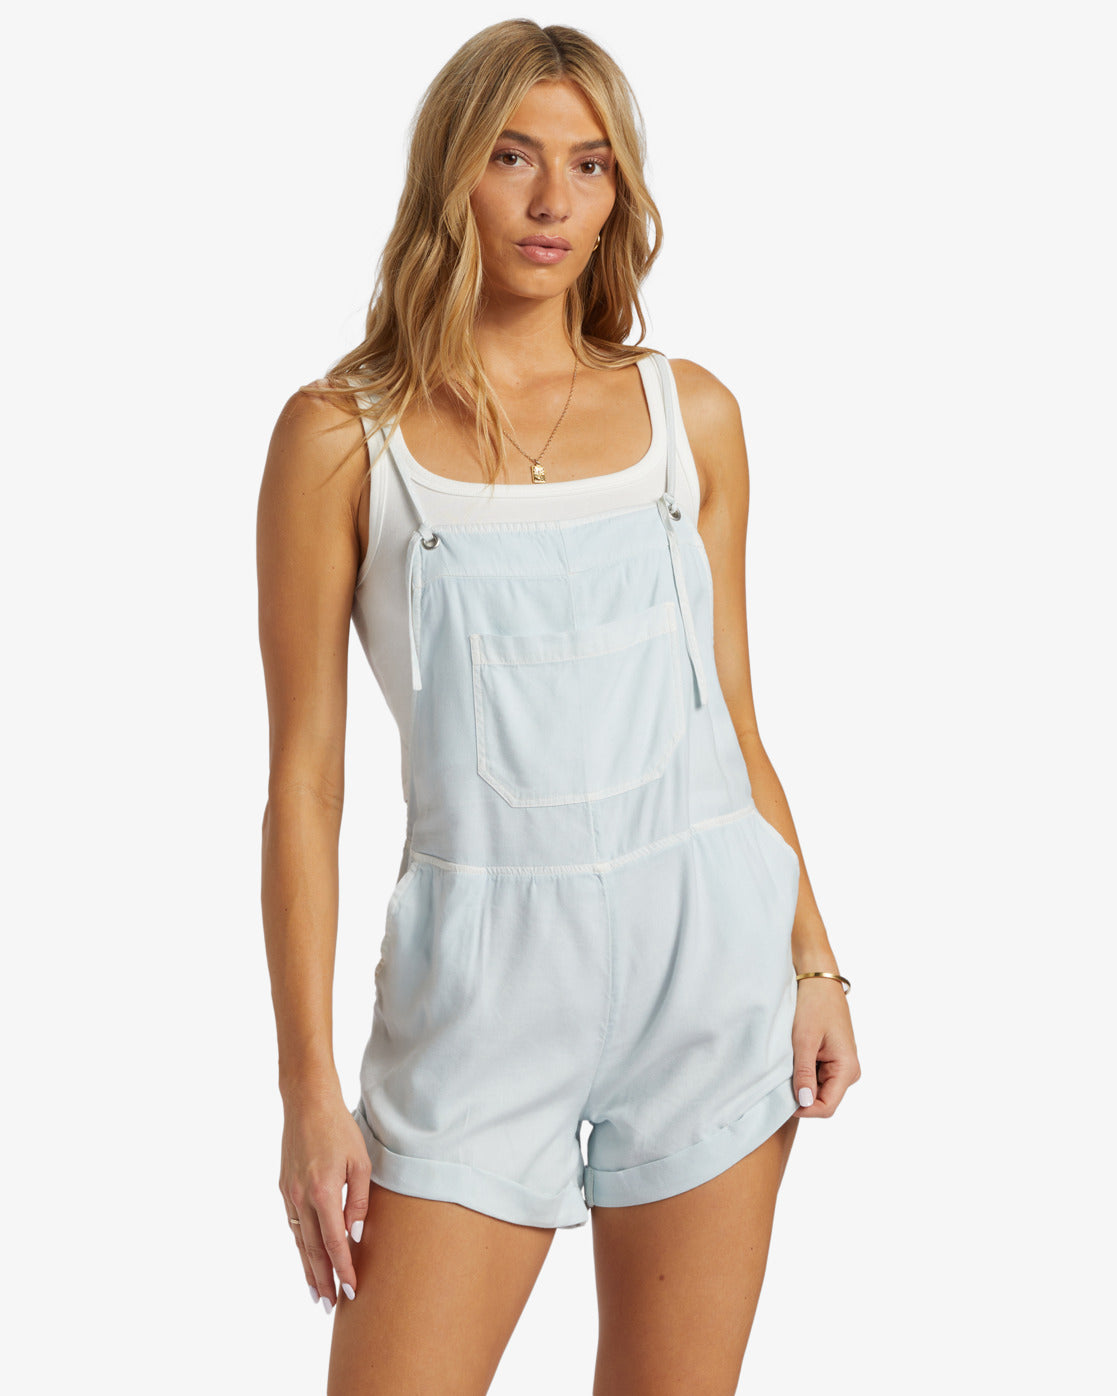 Front view of woman wearing a light blue color shorts romper by Billabong